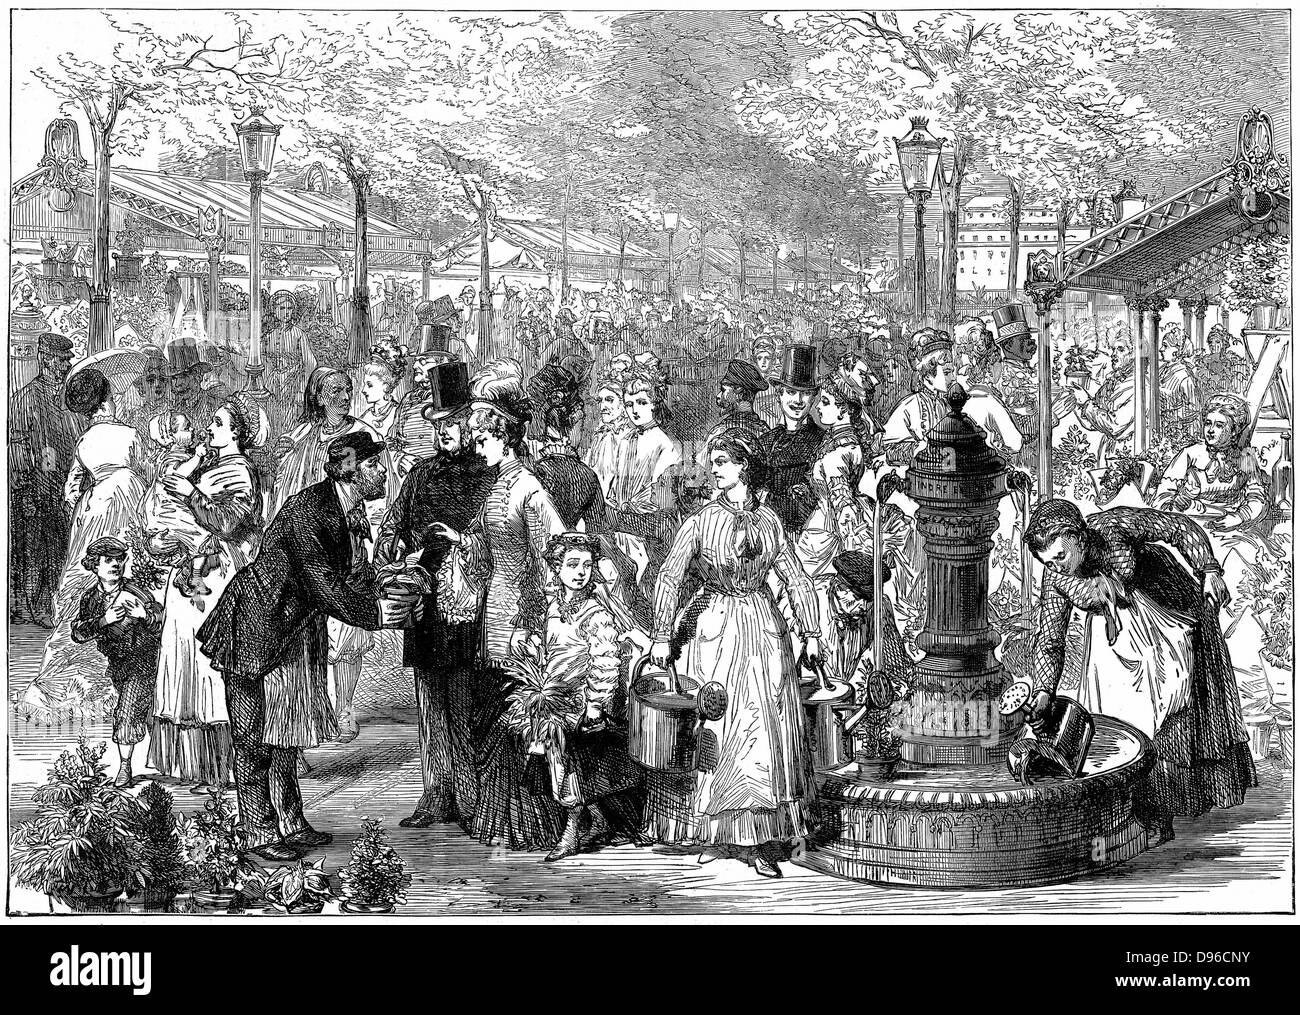 New Flower Market, Paris. Flower sellers filling their water cans at the fountain. From 'The Illustrated London News', 4 July 1874. Stock Photo